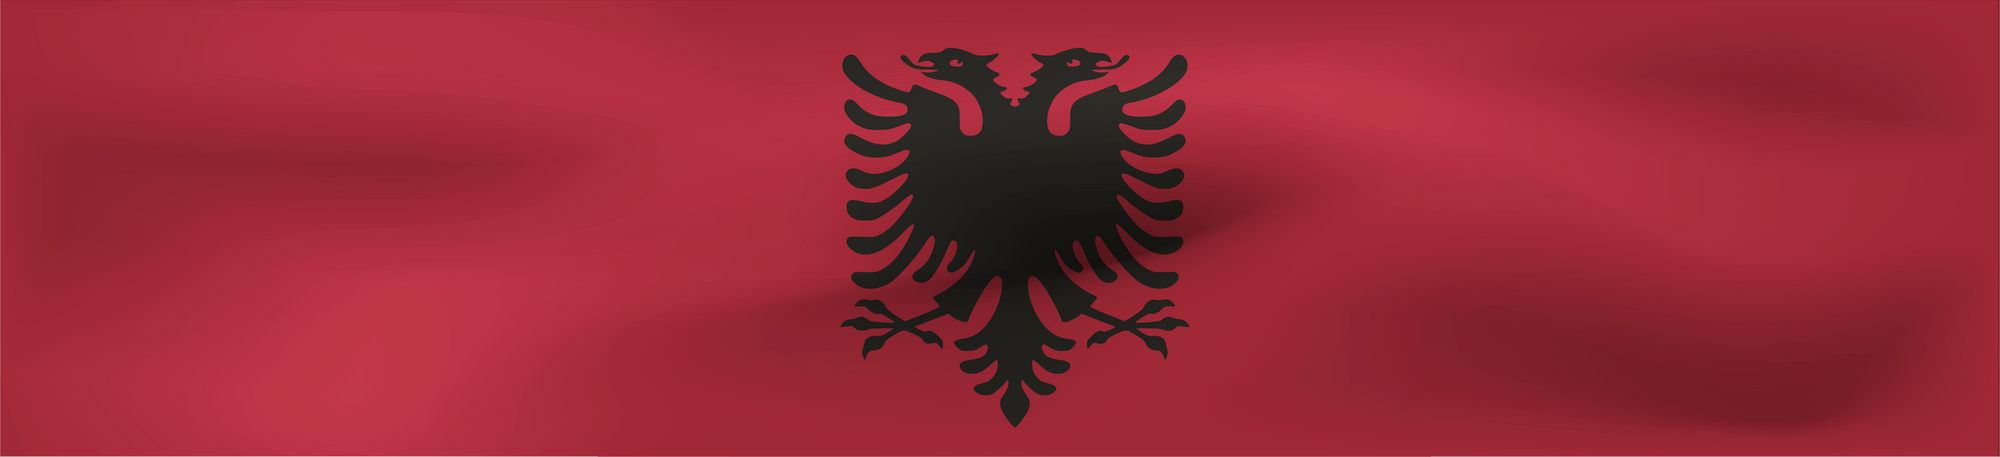 DIDWW adds Albania to its coverage (+355-4)